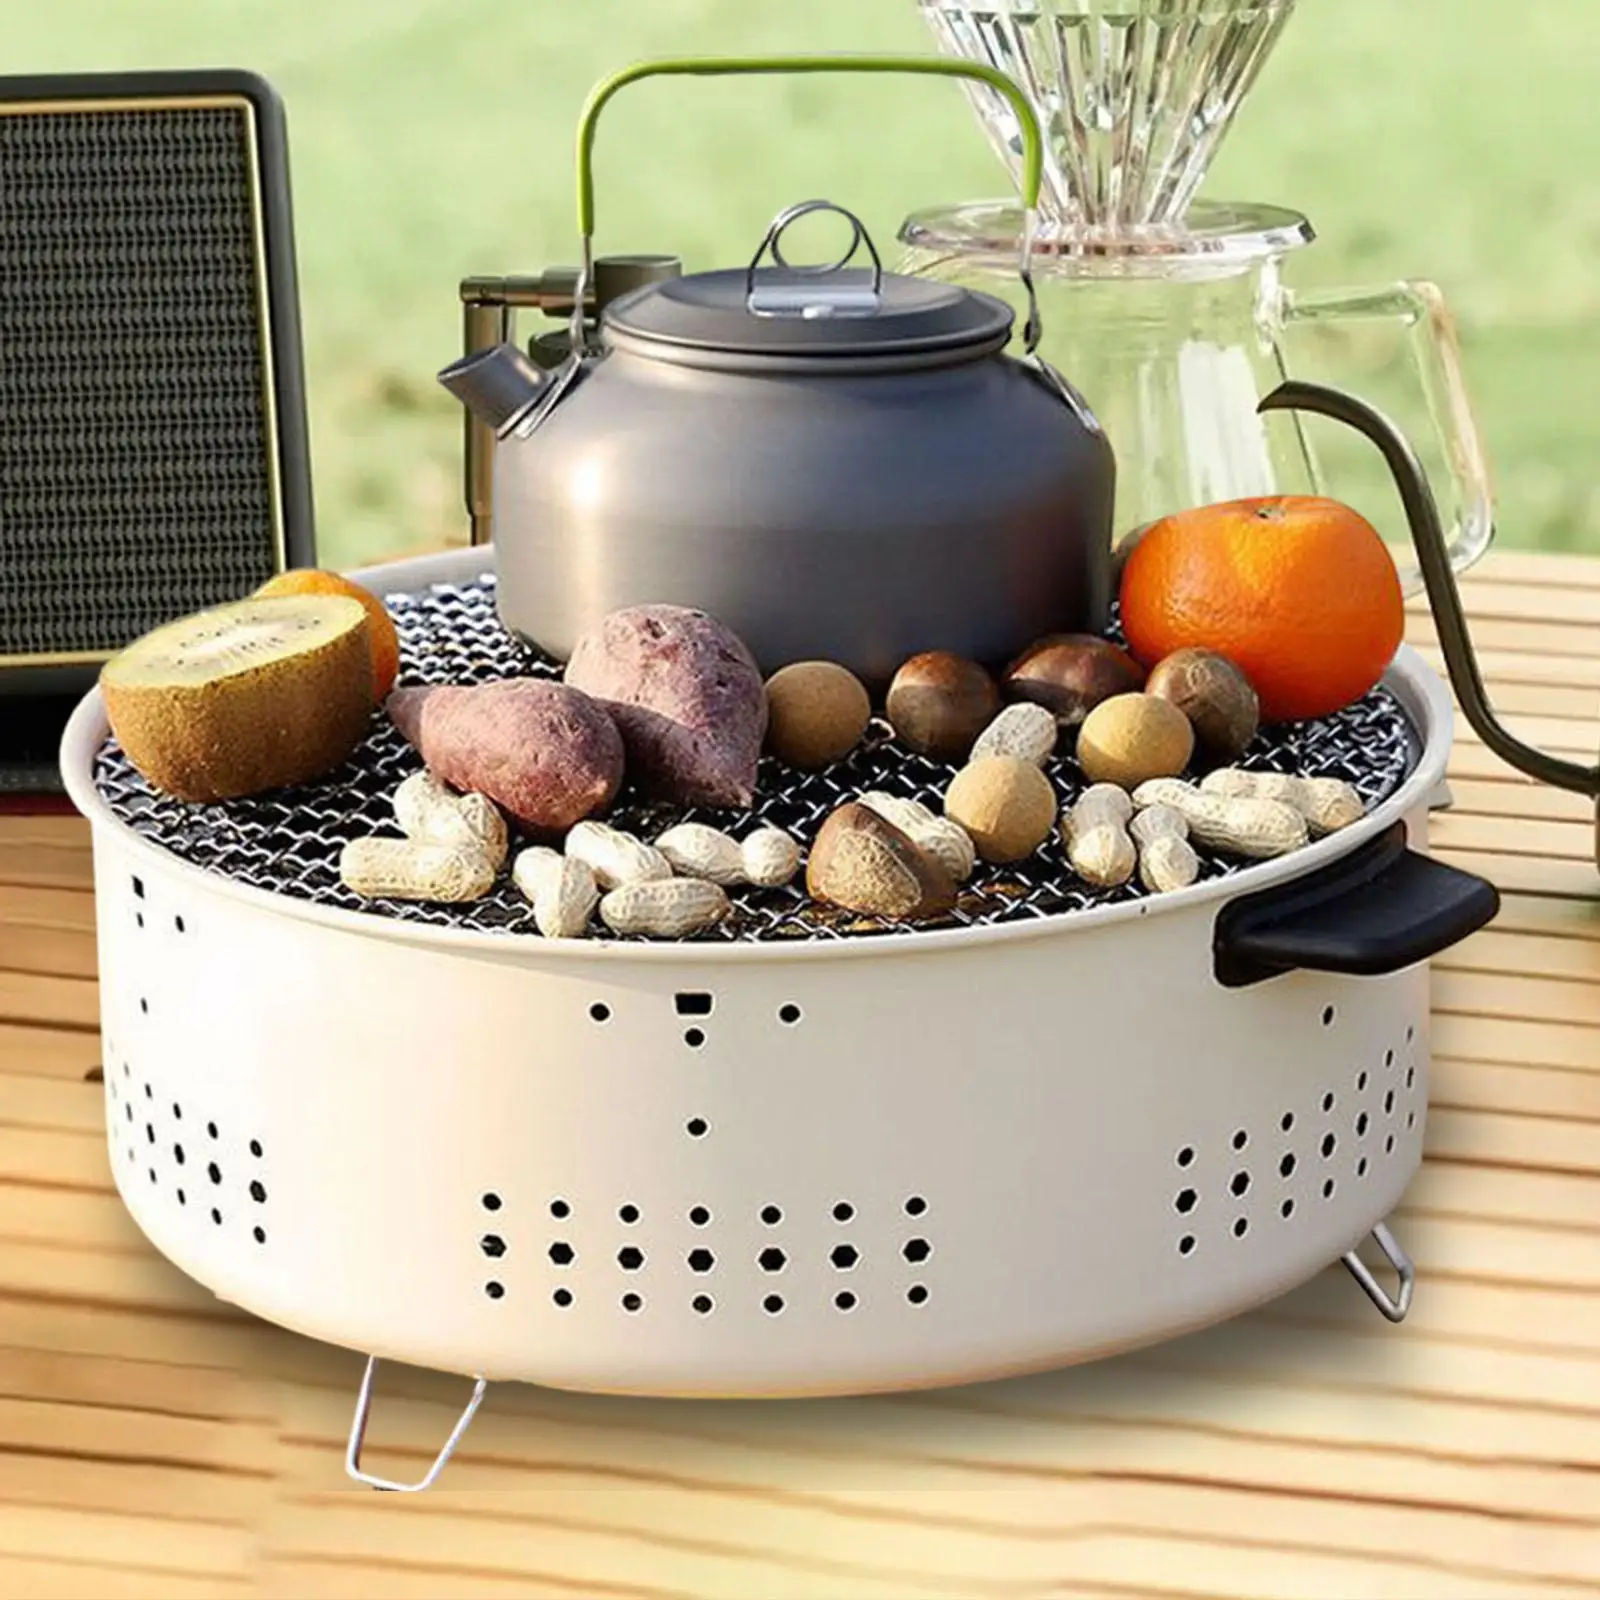 Charcoal Grill Heating Round Firepit Bowl with Grill Grid Wood Burning Camp Stove for Backyard Patio Outdoor Garden Camping